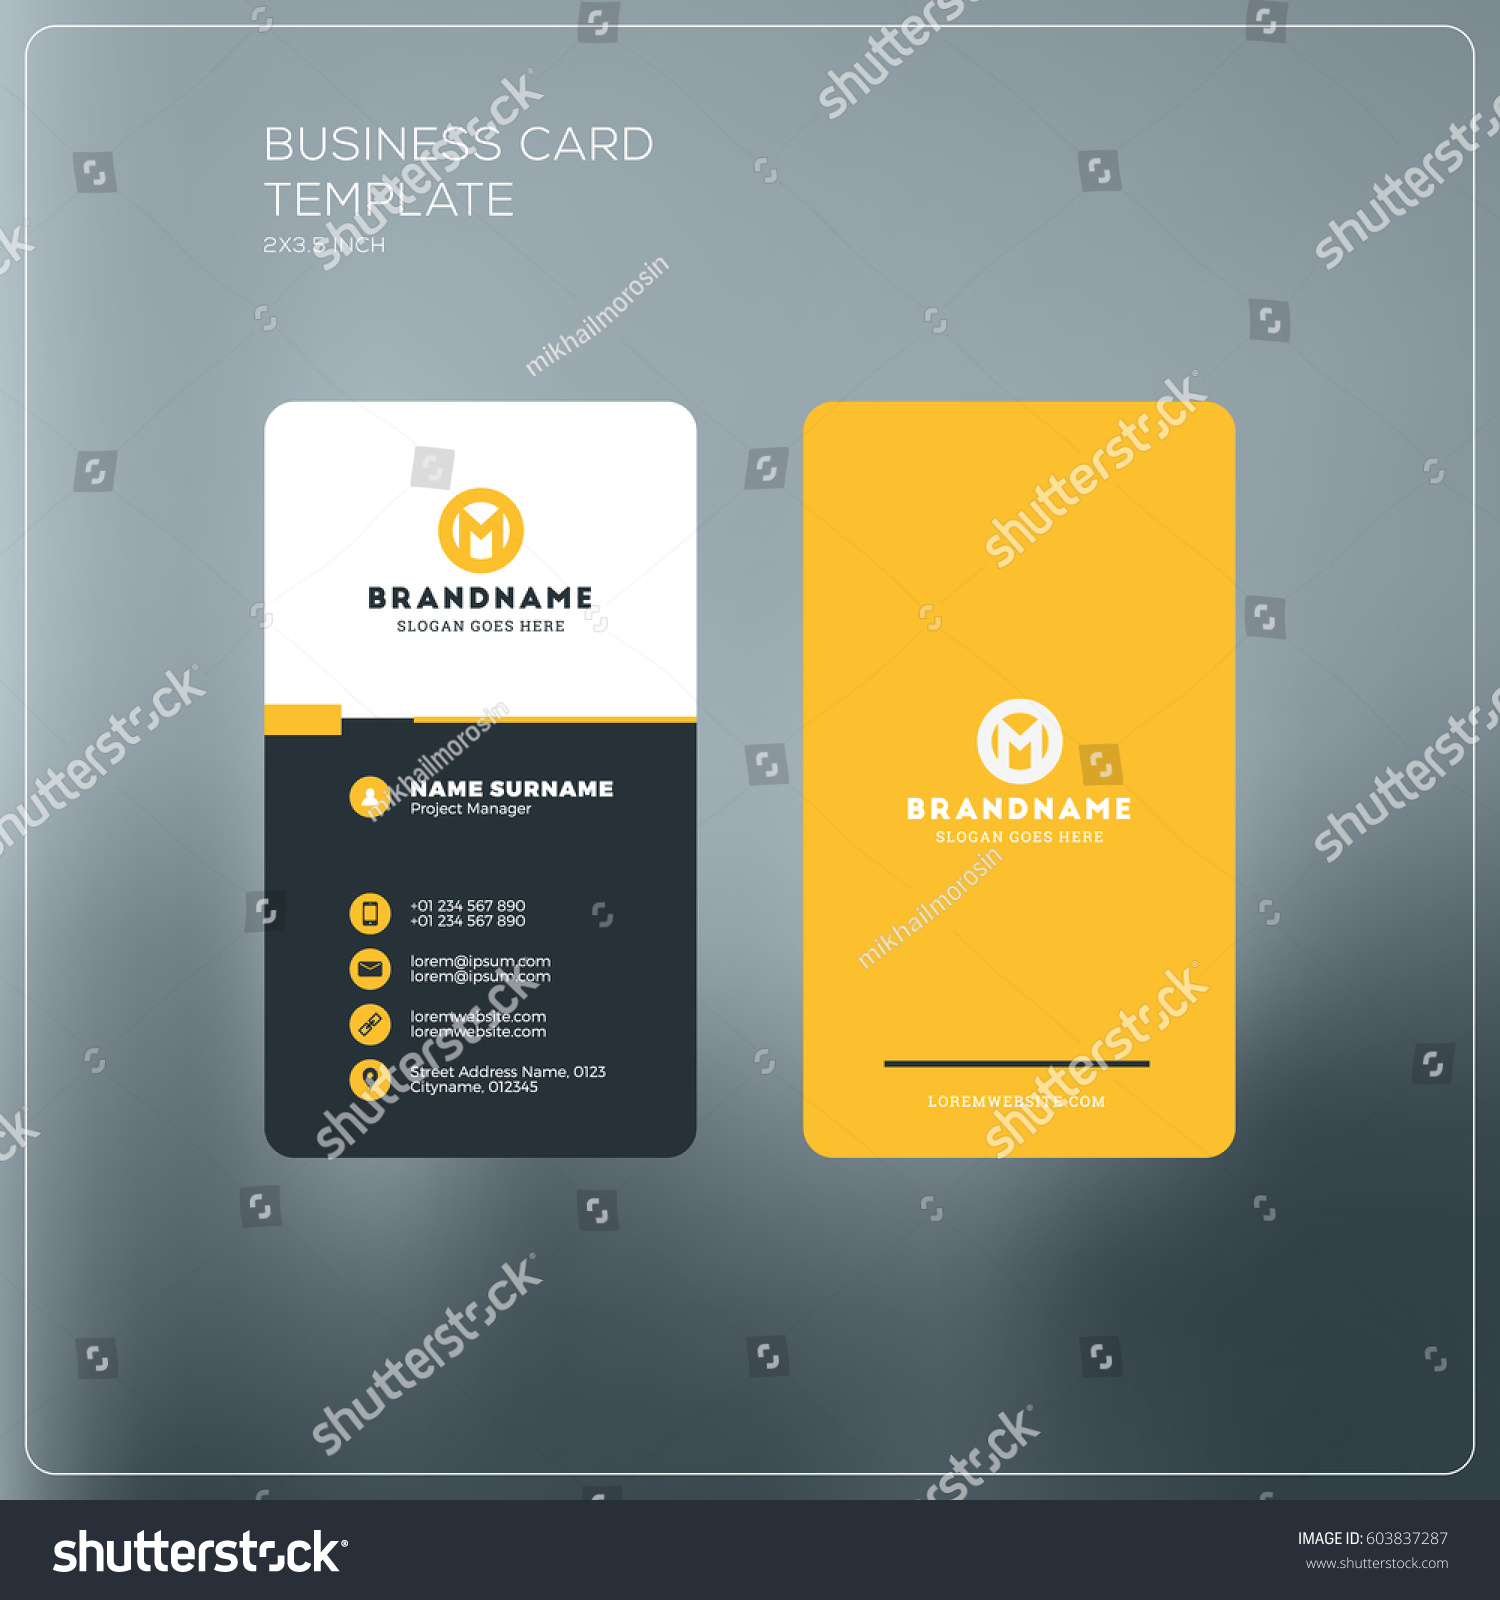 Vertical business card print template. Personal business card with company logo. Black and yellow colors. Clean flat design. Vector illustration. Business card mockup #603837287